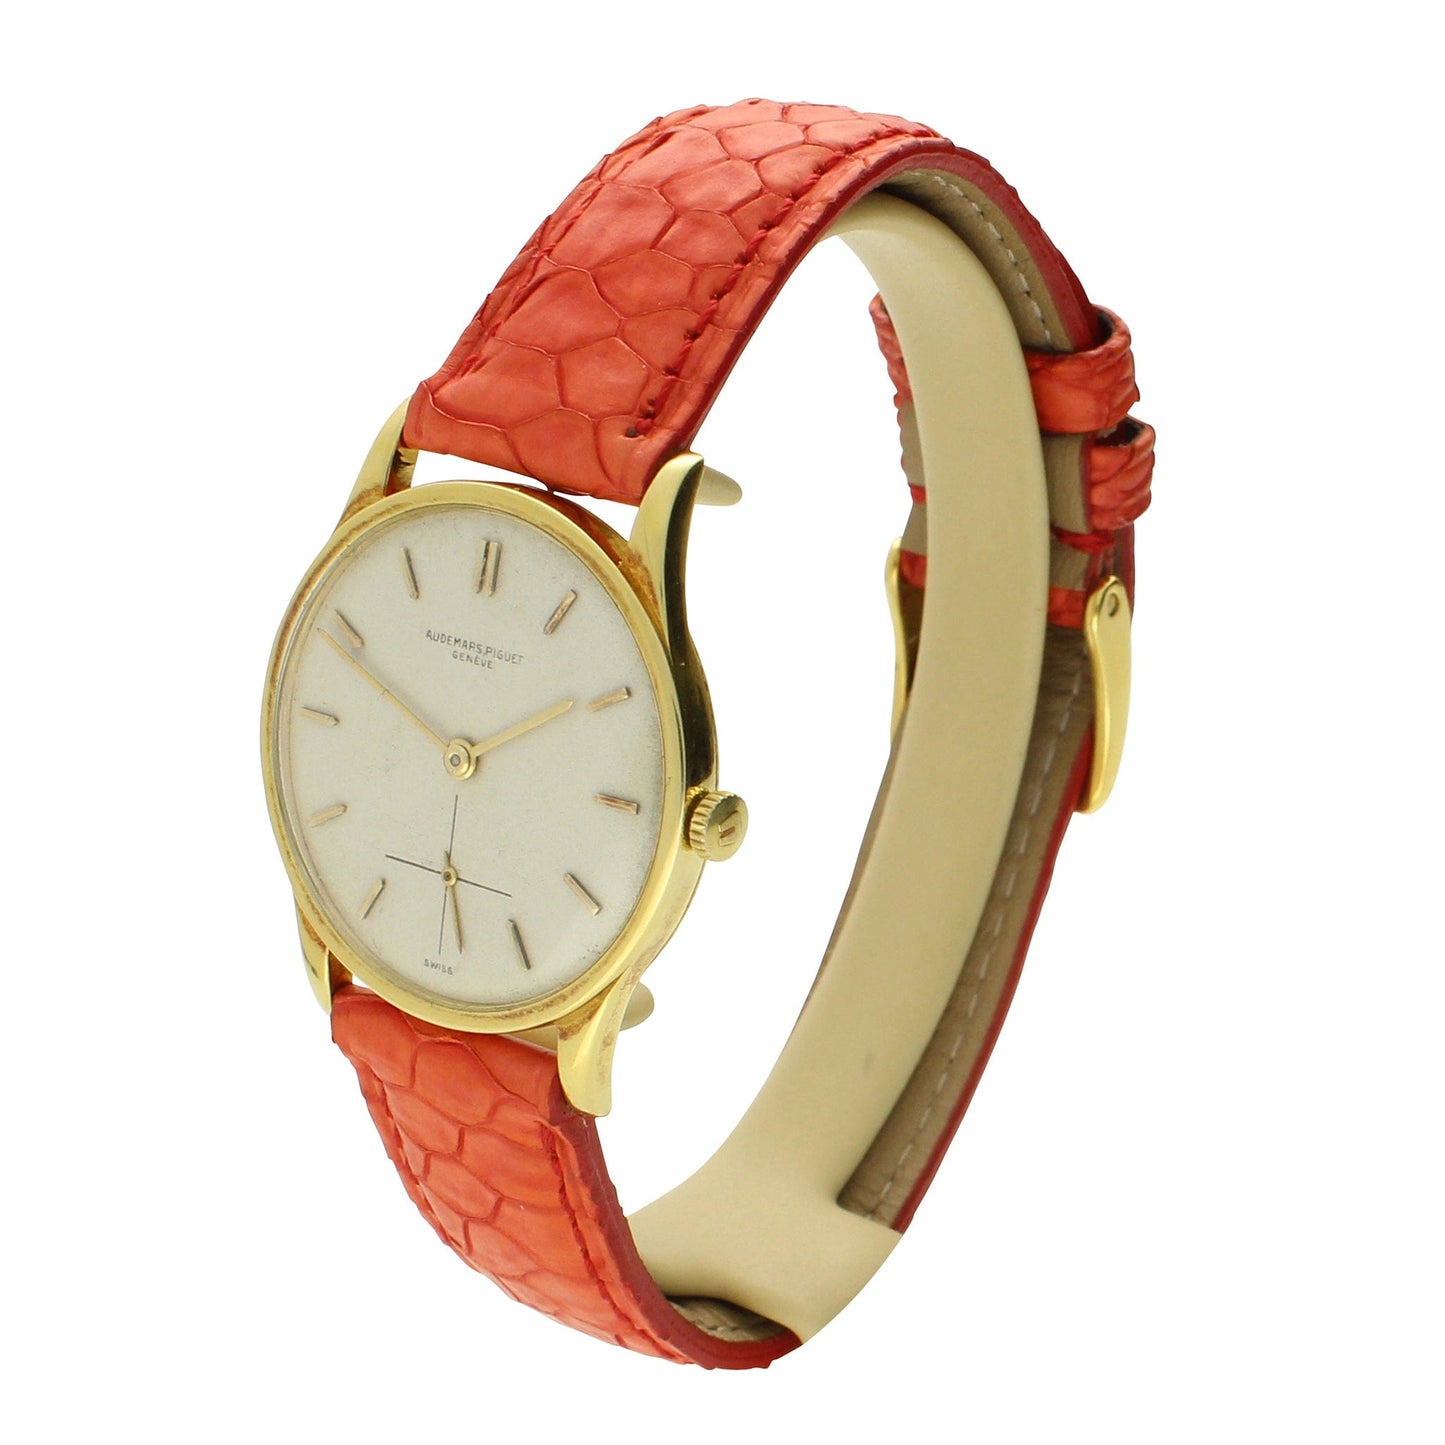 18ct yellow gold, reference 4962 wristwatch. Made 1955